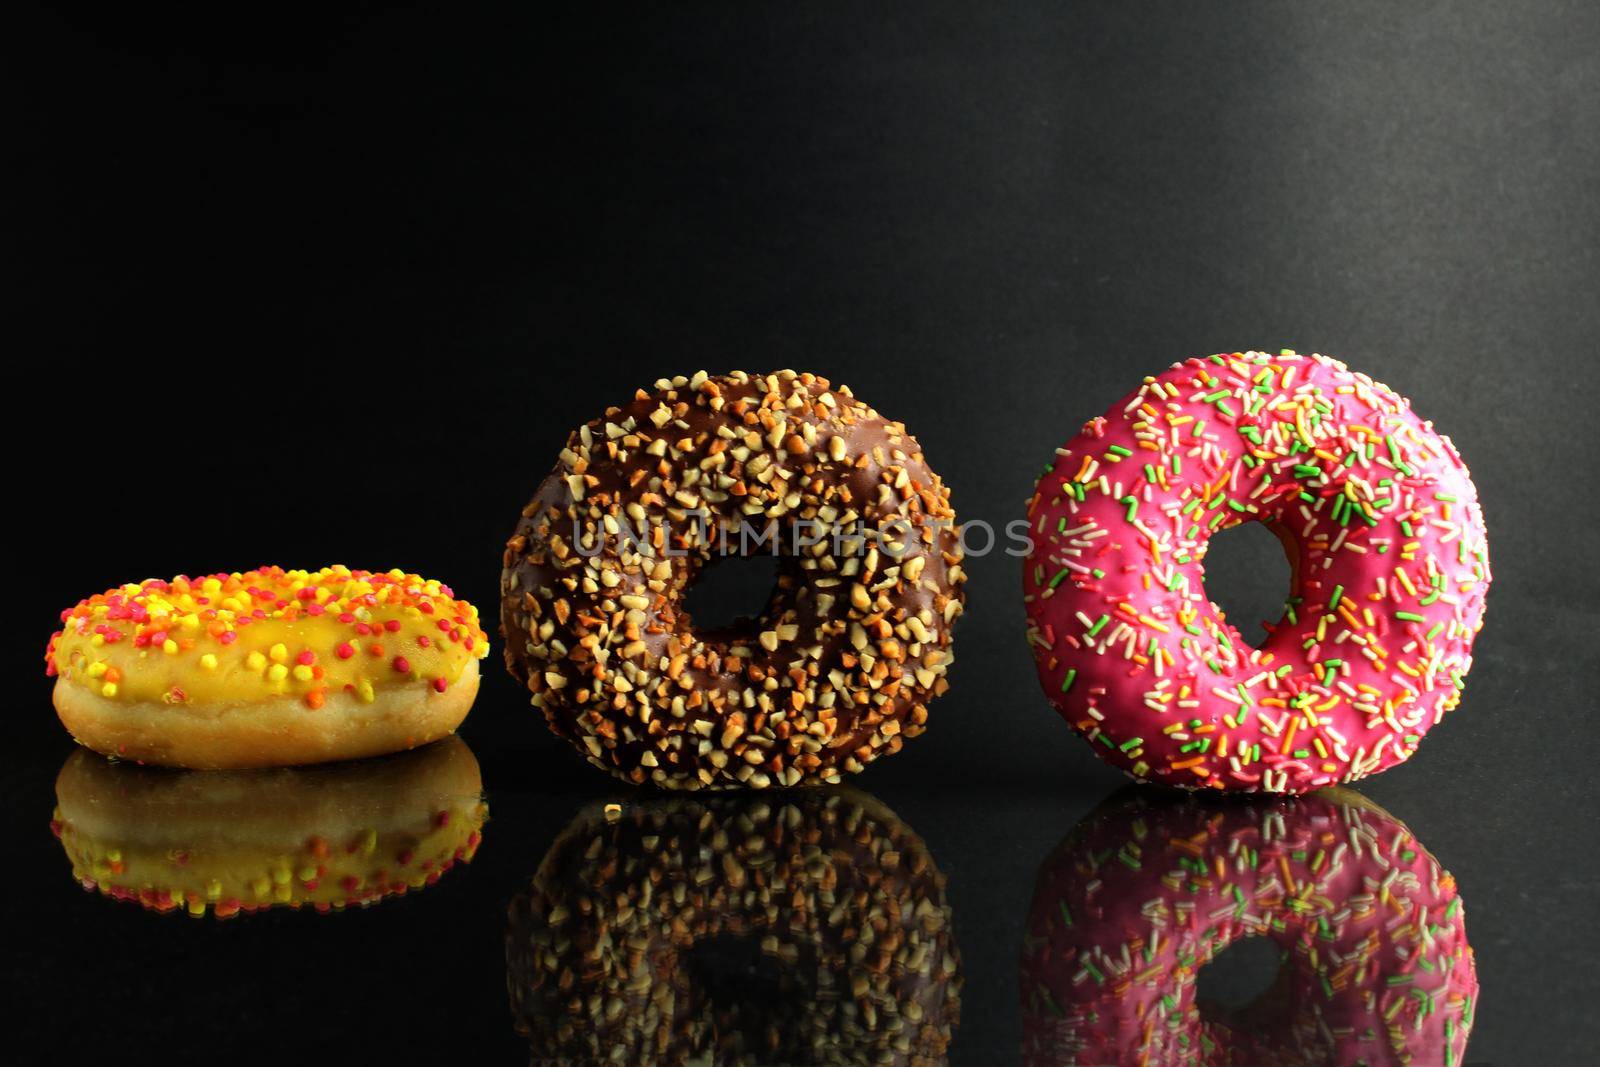 Donuts with icing lie stops and pink bright stands on a black background with room for text.